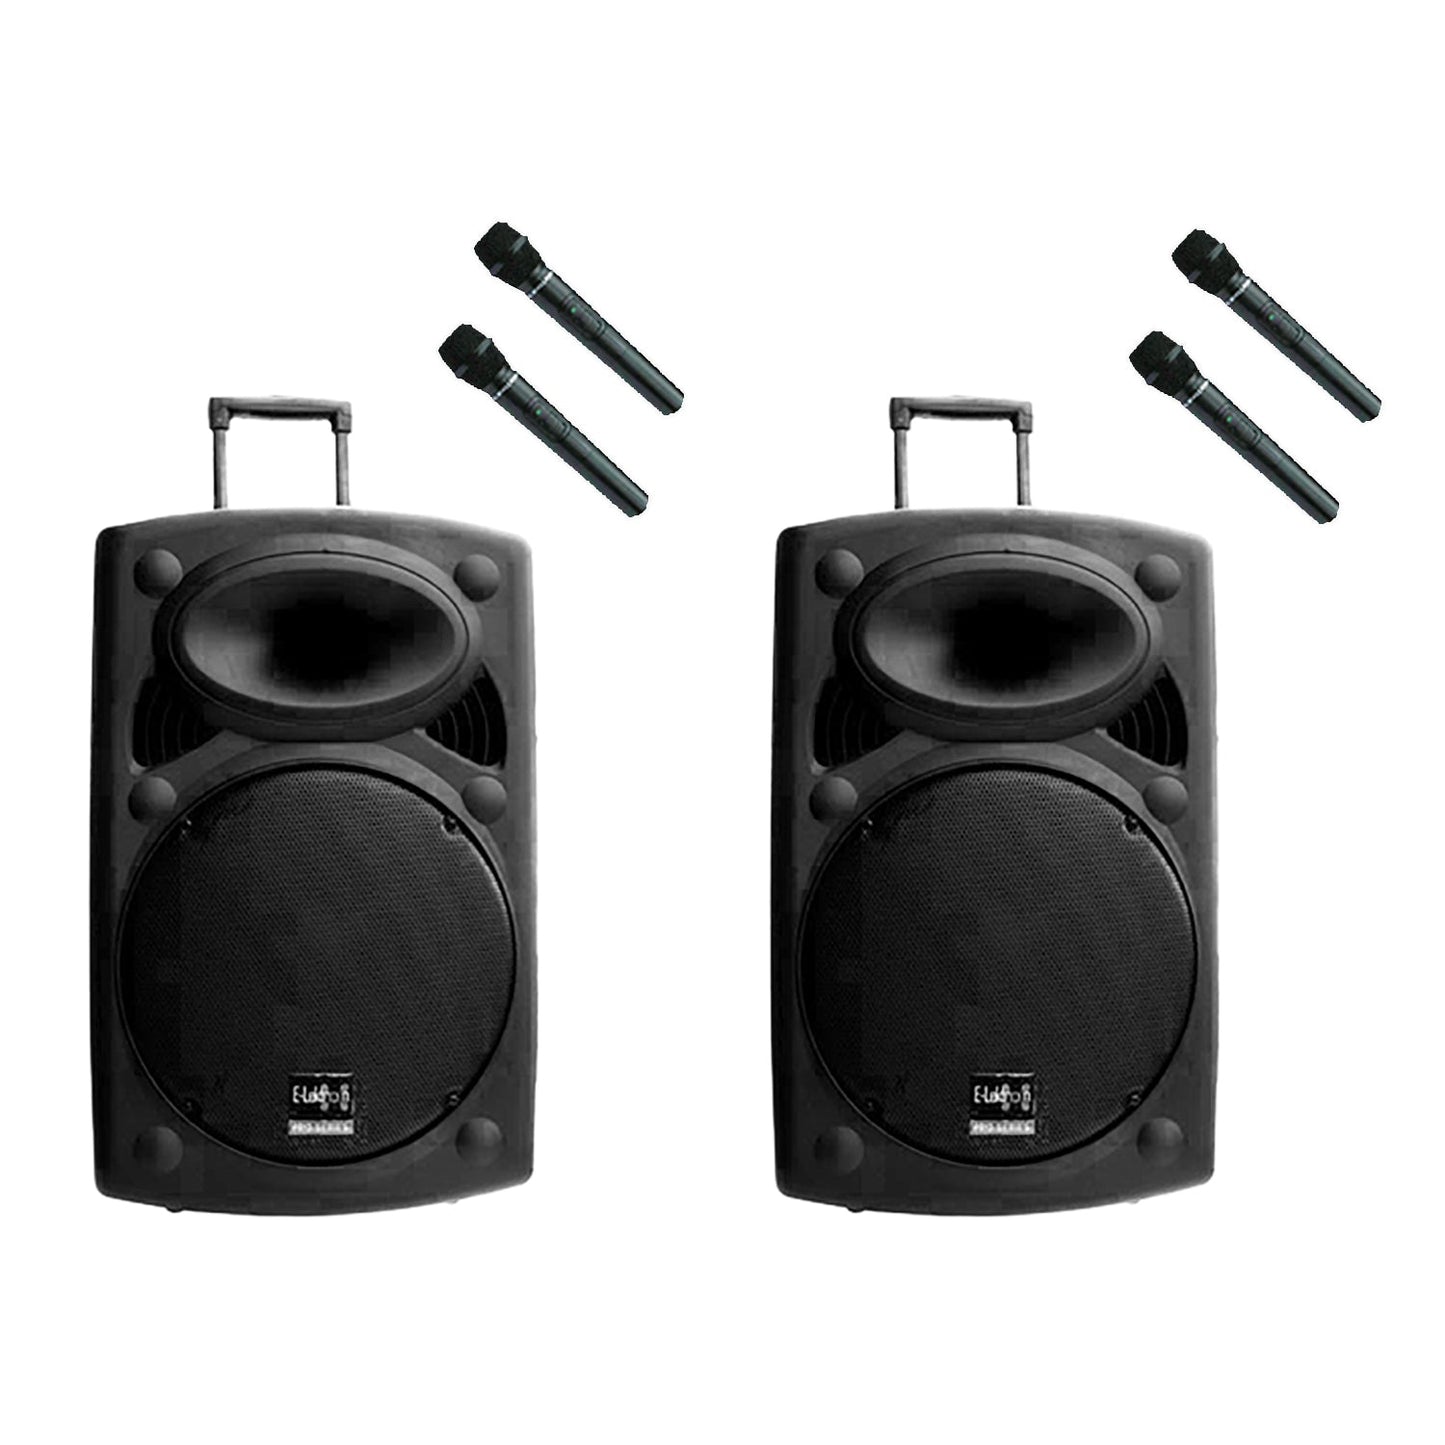 E-Lektron 1800W 2 X 15" inch Bluetooth Portable Loud Speakers Sound System Battery Operate USB Record 2 Microphones